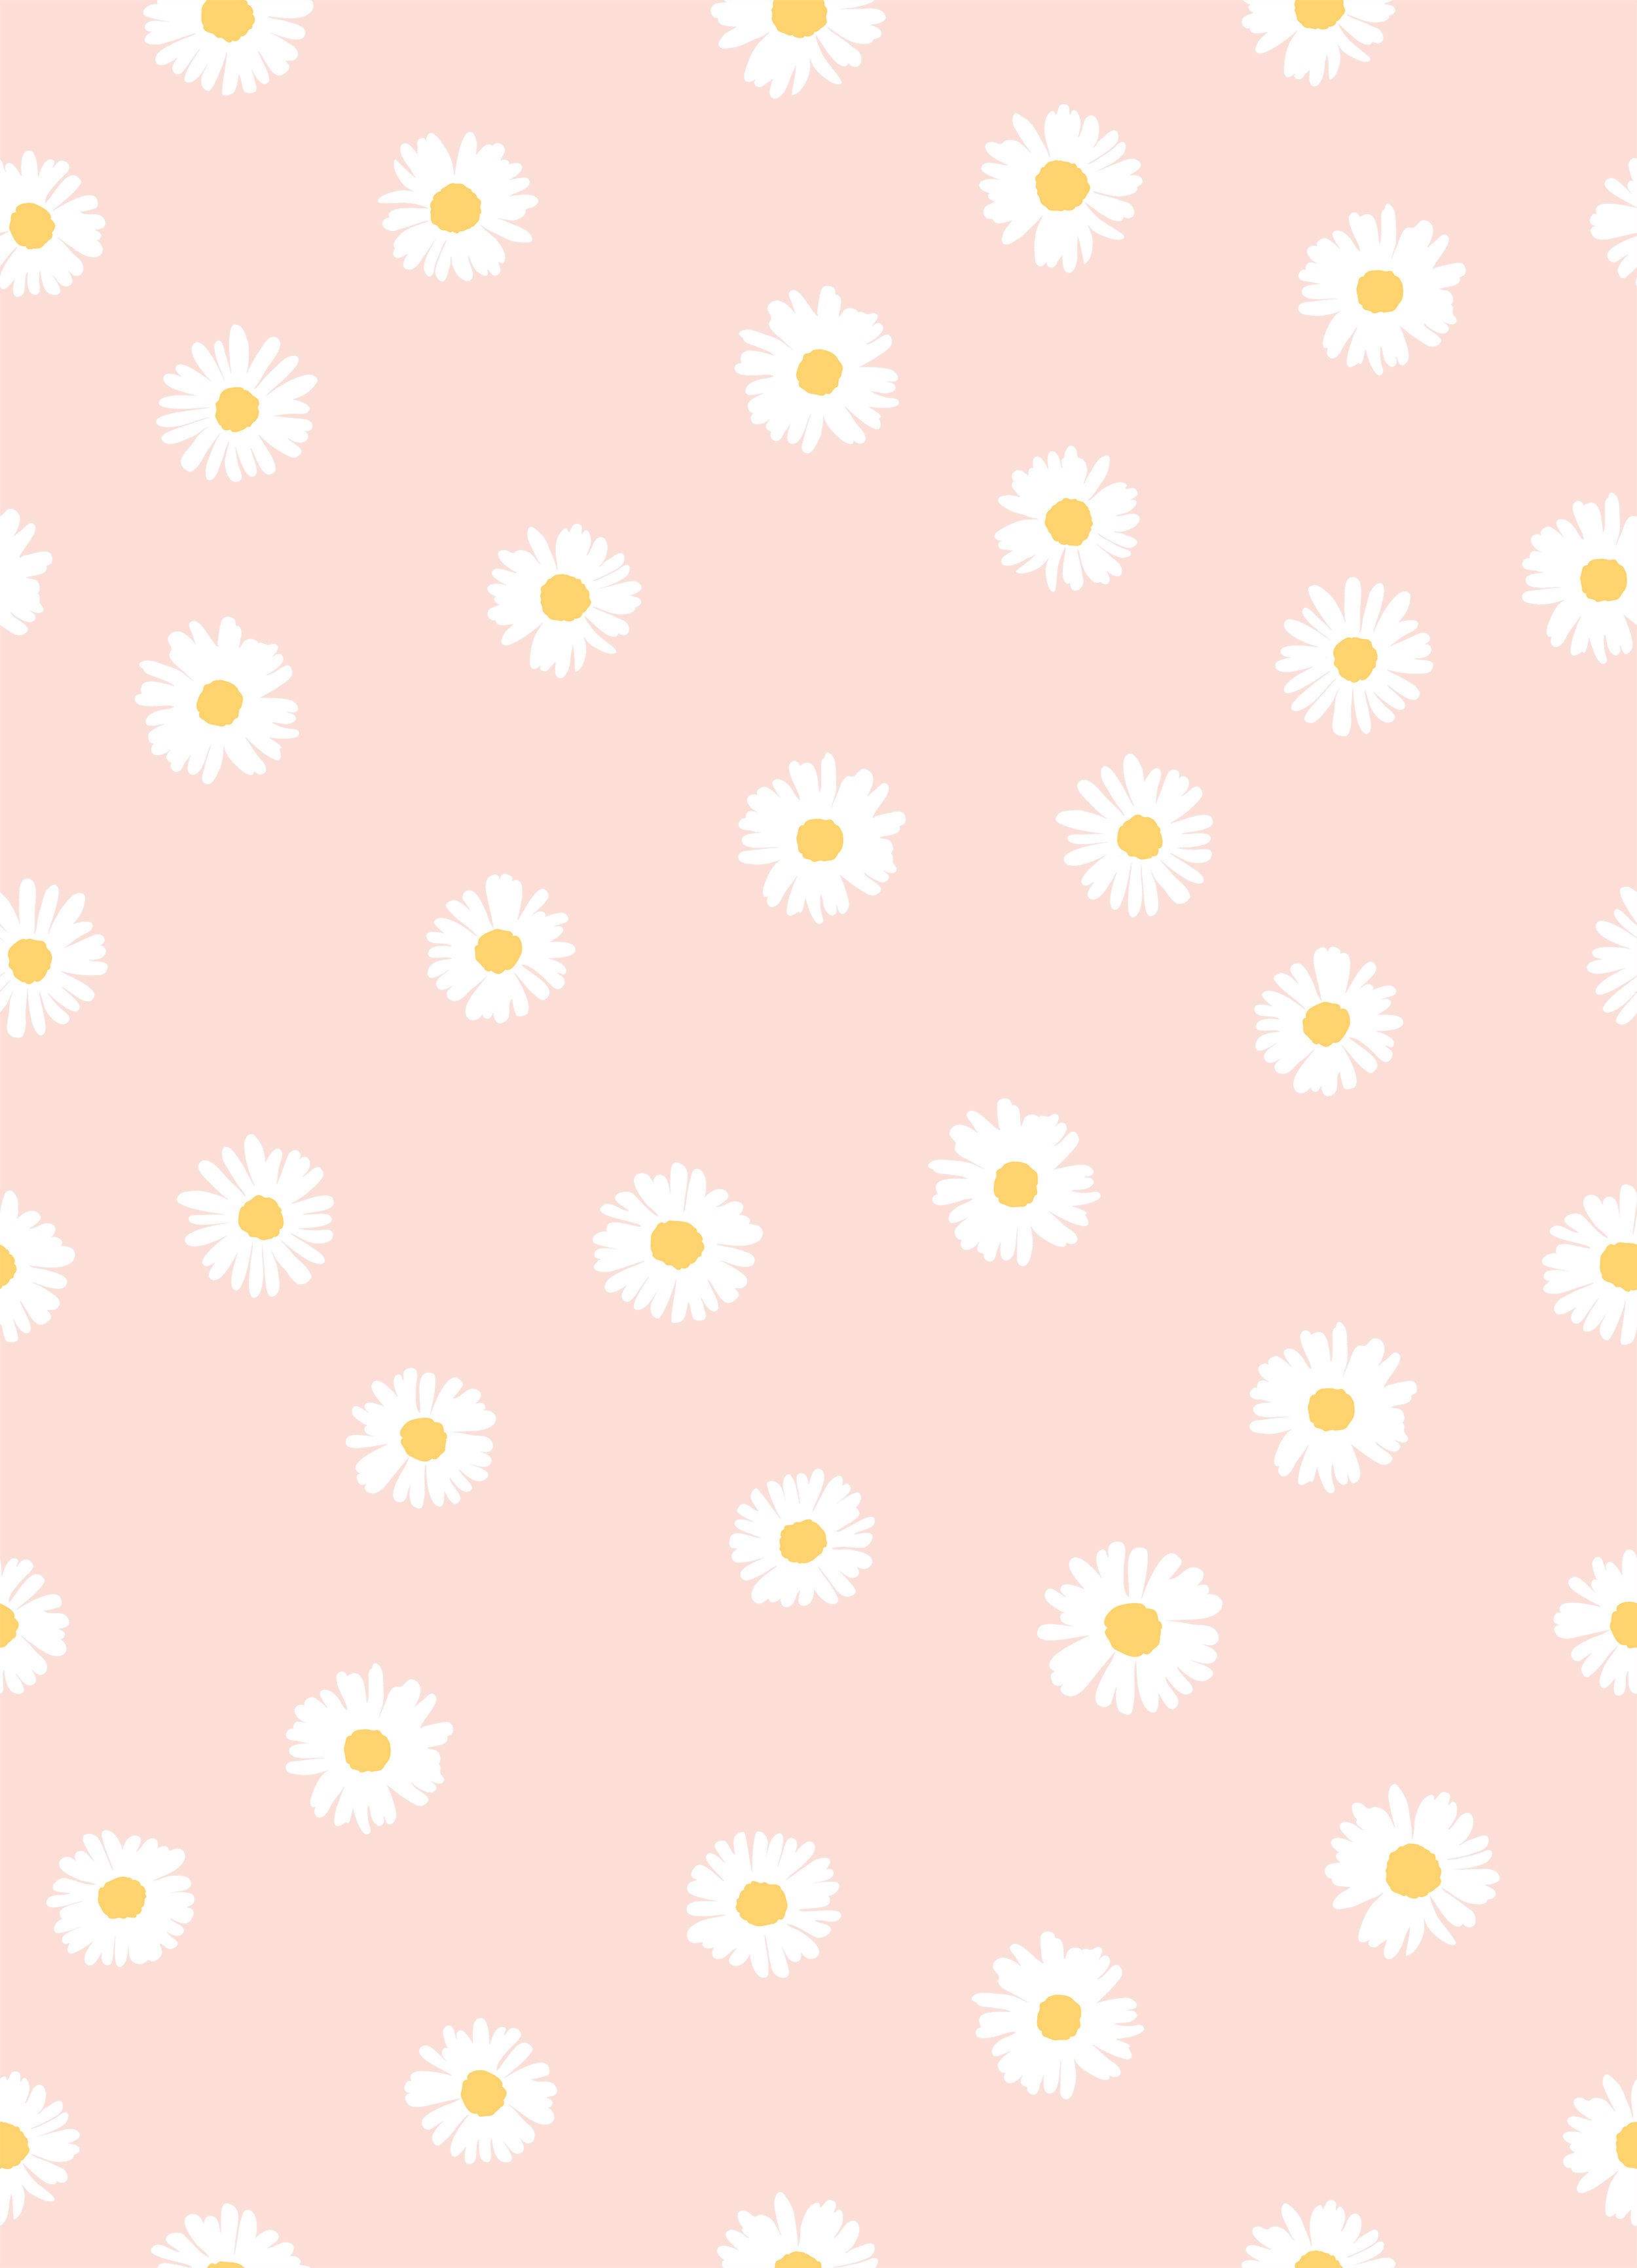 A close-up view of the Daisy Daze Wallpaper, showcasing its charming pattern of white daisies with yellow centers scattered across a light peach background. This vibrant and cheerful wallpaper pattern brings a playful yet subtle aesthetic to any room, ideal for spaces needing a touch of whimsy.